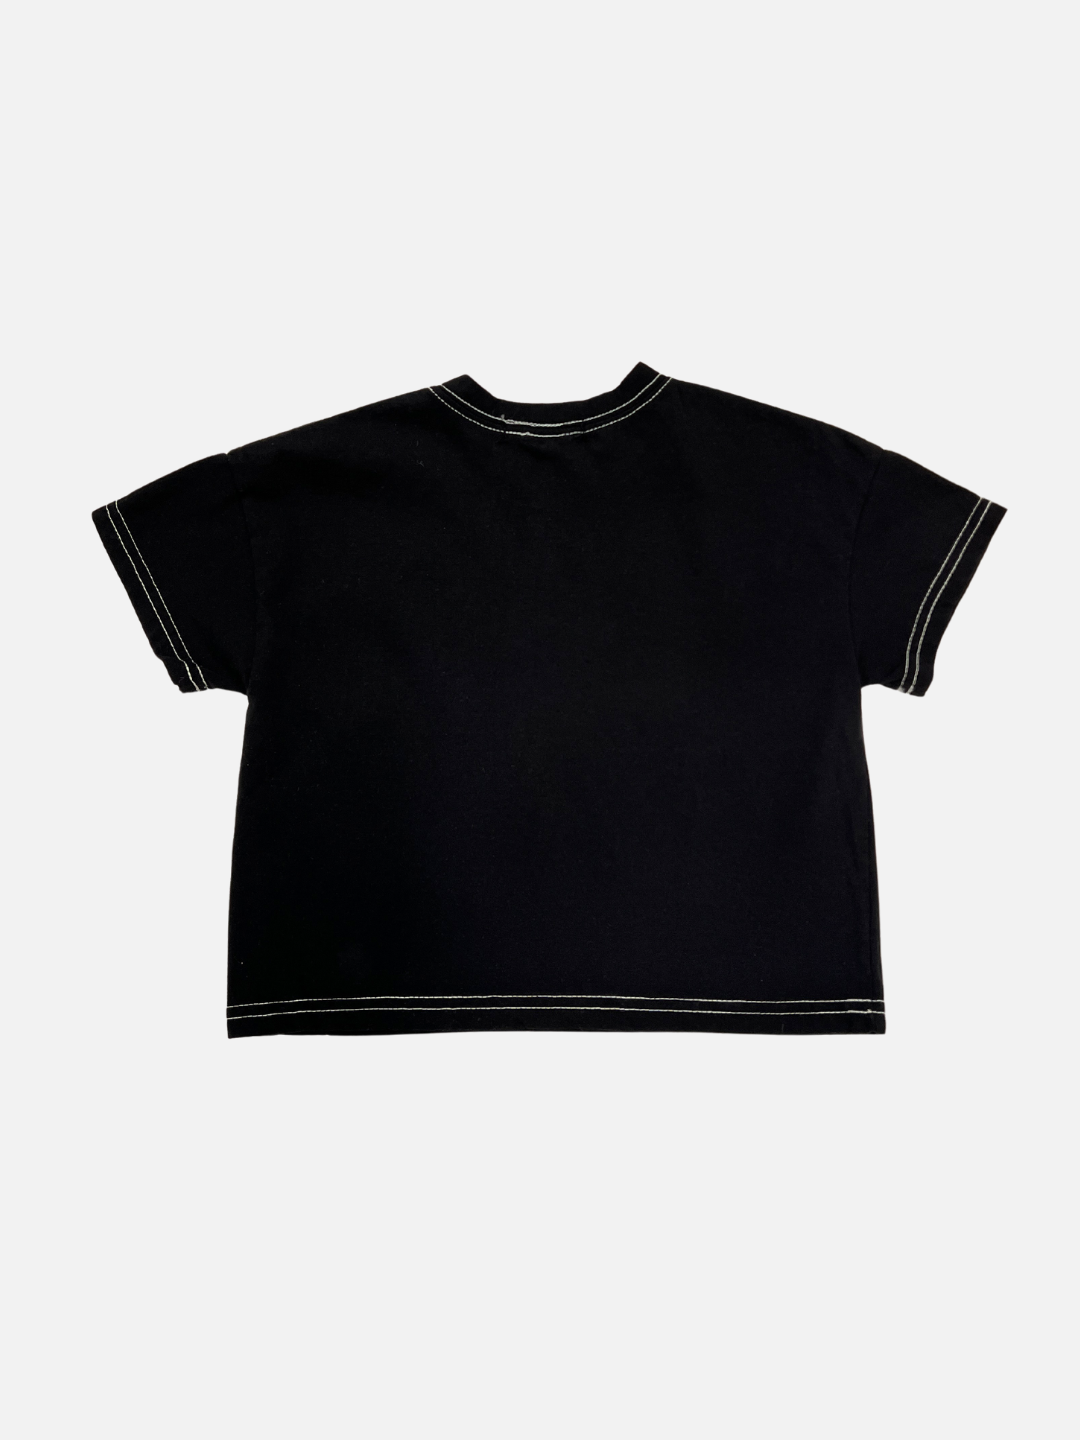 Black | Back view of the kids' stitch pocket tee in Black featuring contrast white stitch